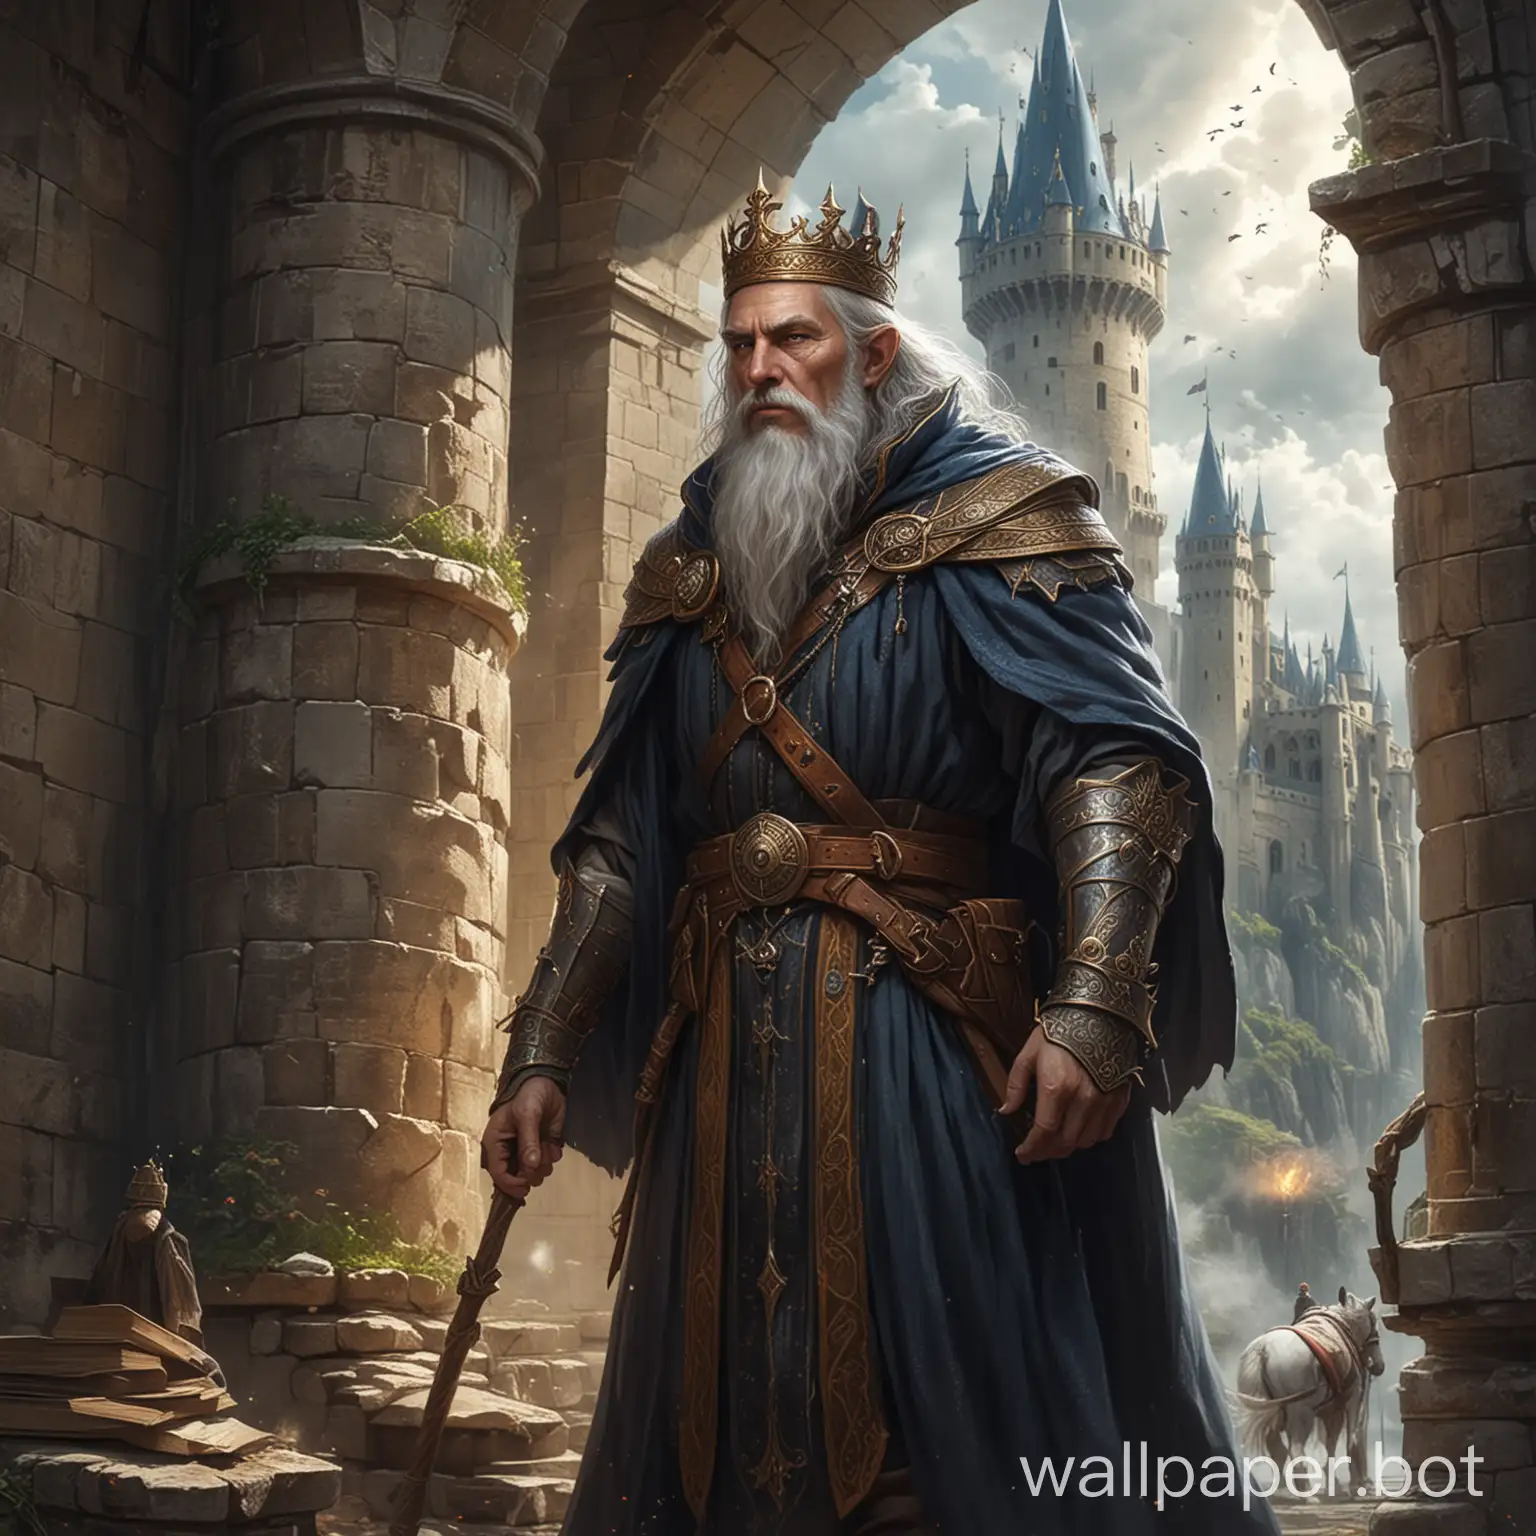 Draw a fantasy wizard man who possesses very strong magic, in a tower where the king has arrived